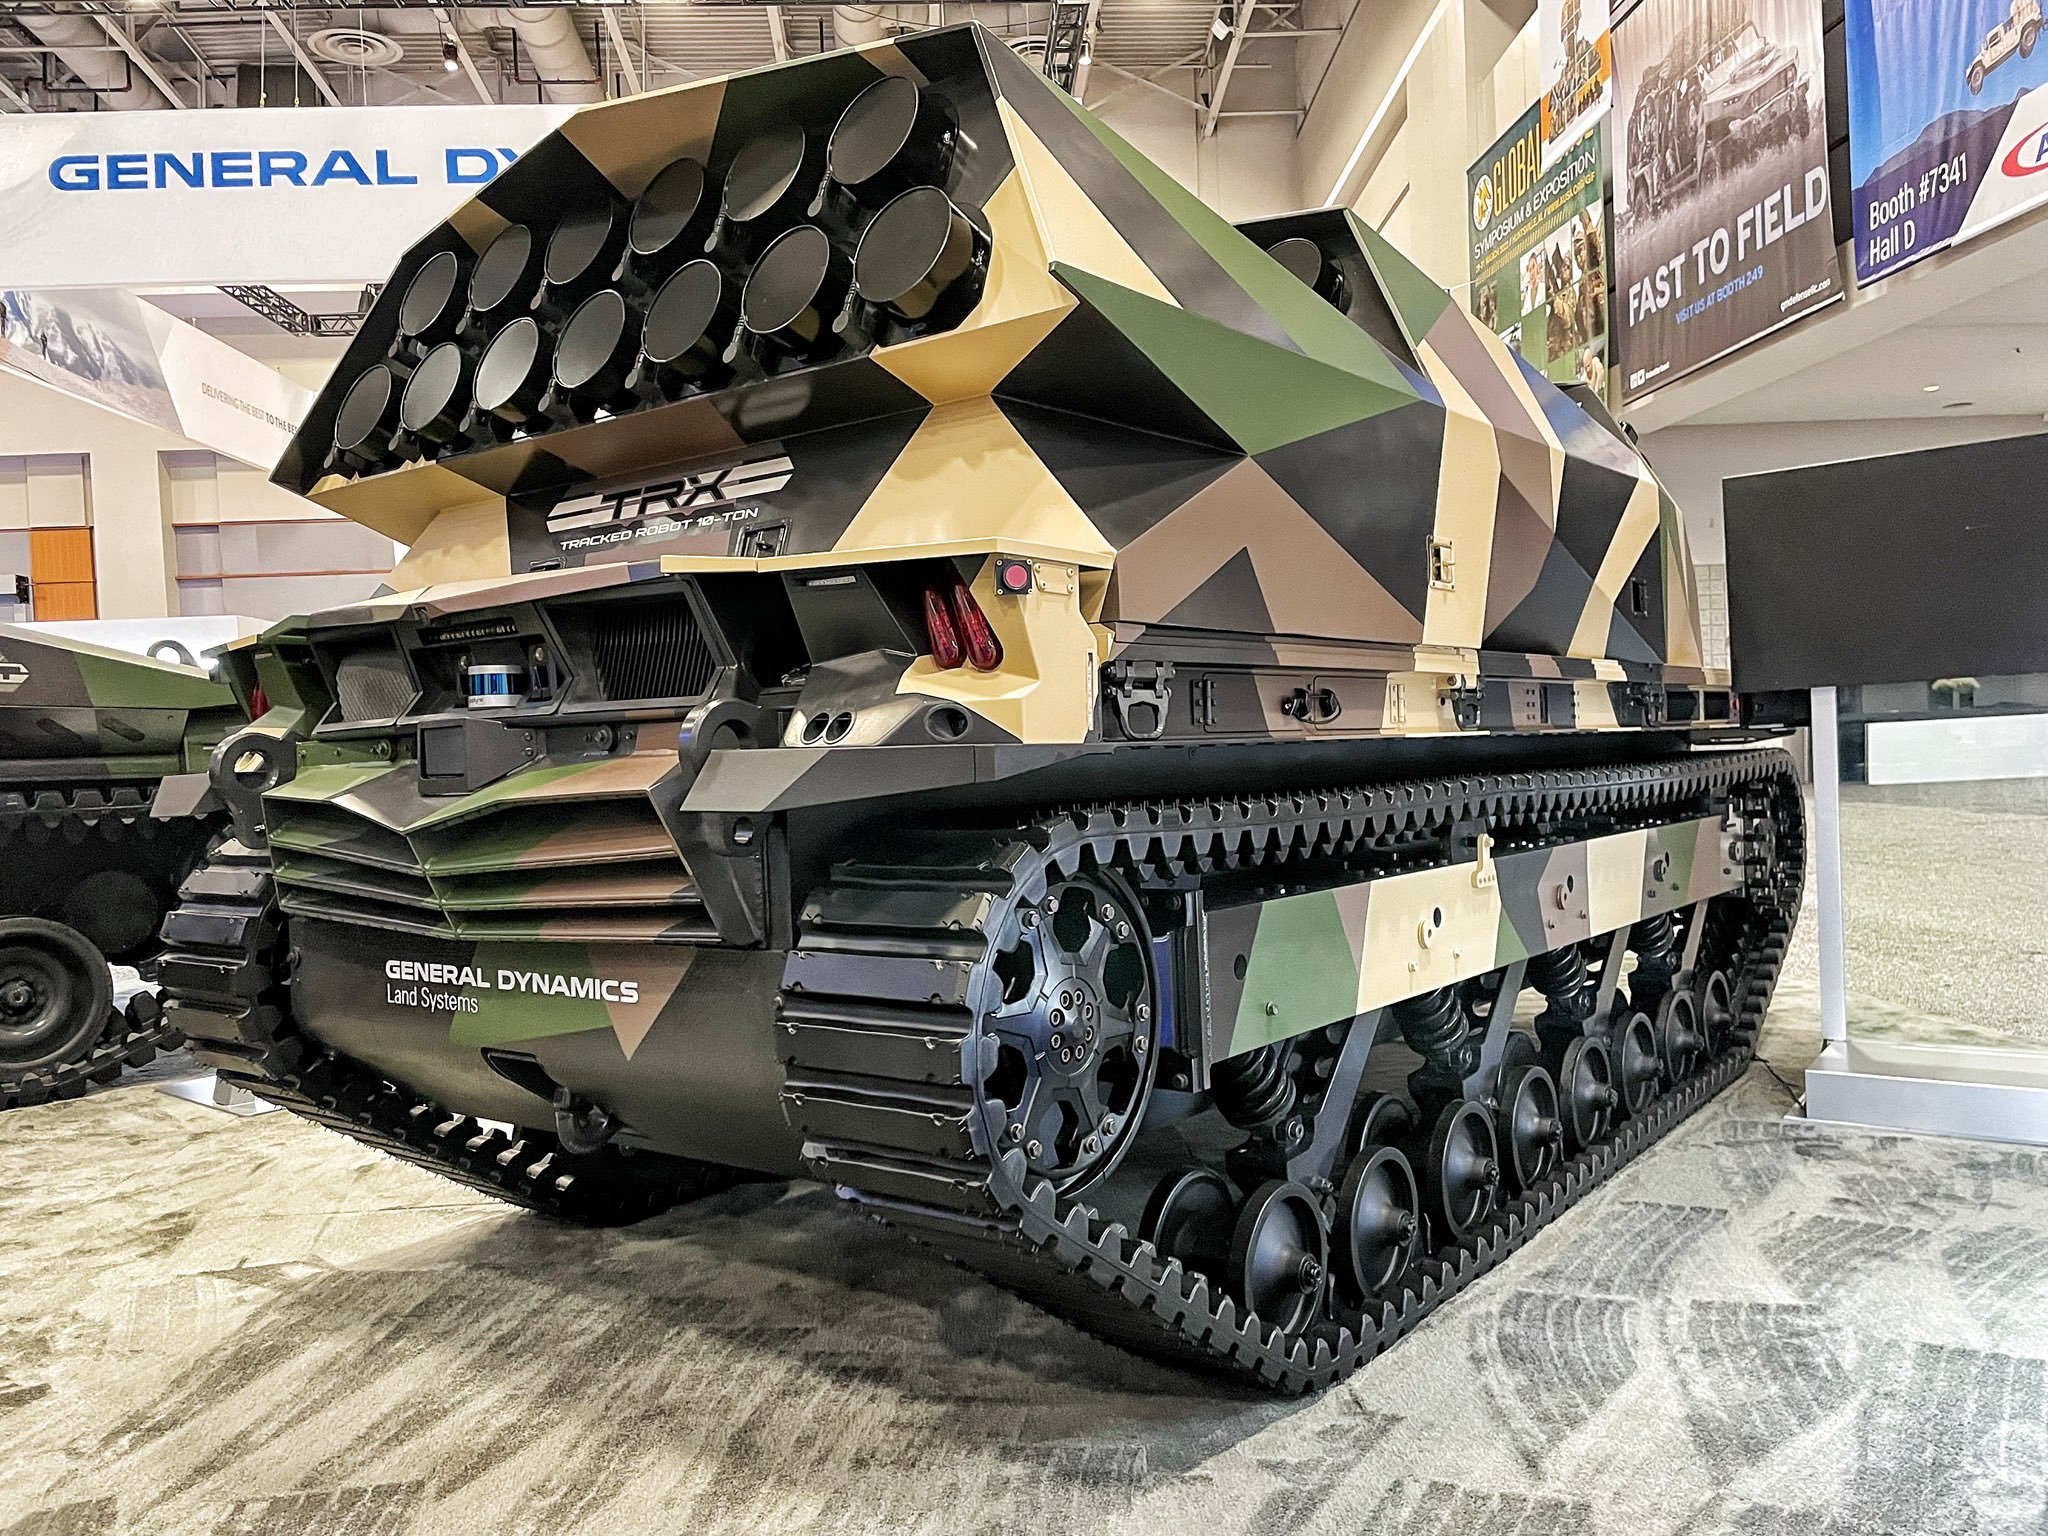 General Dynamics Land Systems on Twitter: "NEWS: The @usarmy, through a competitive process, has chosen General Dynamics Land Systems' offering for the Mobile Protected Firepower (MPF) program to provide enhanced firepower for